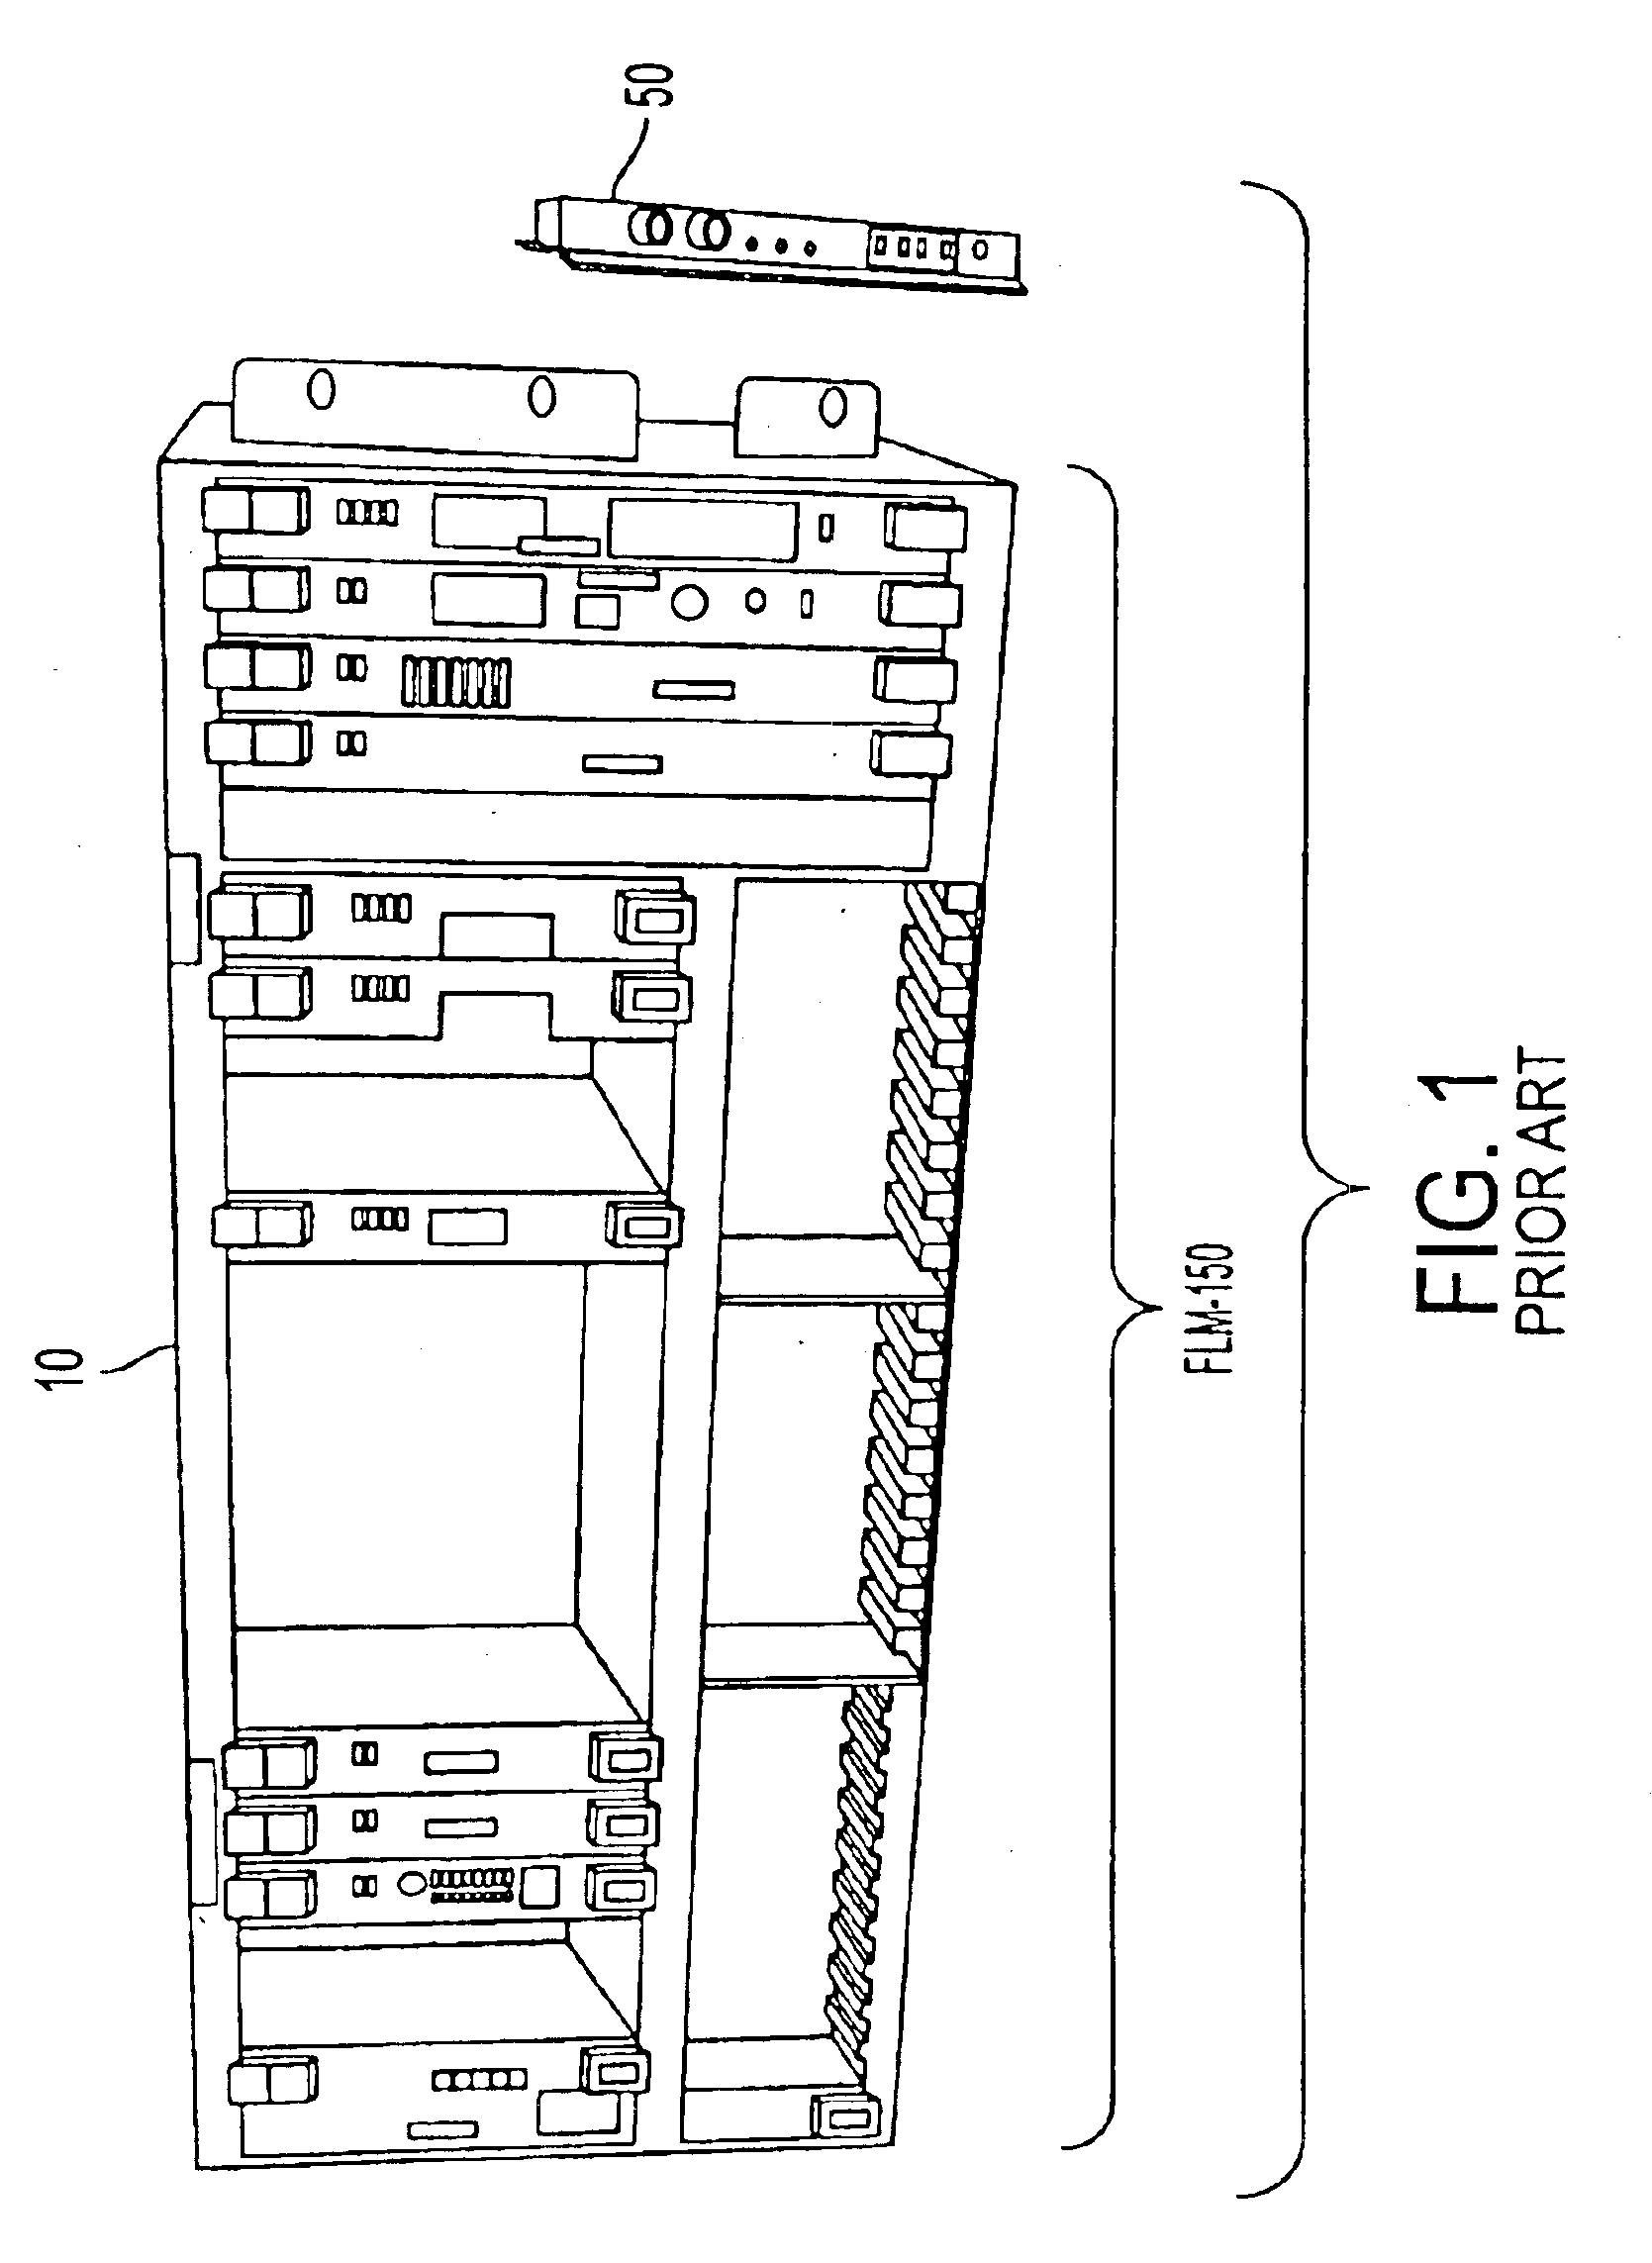 SONET multiplexer having front panel access to electrical and optical connectors and method for using same